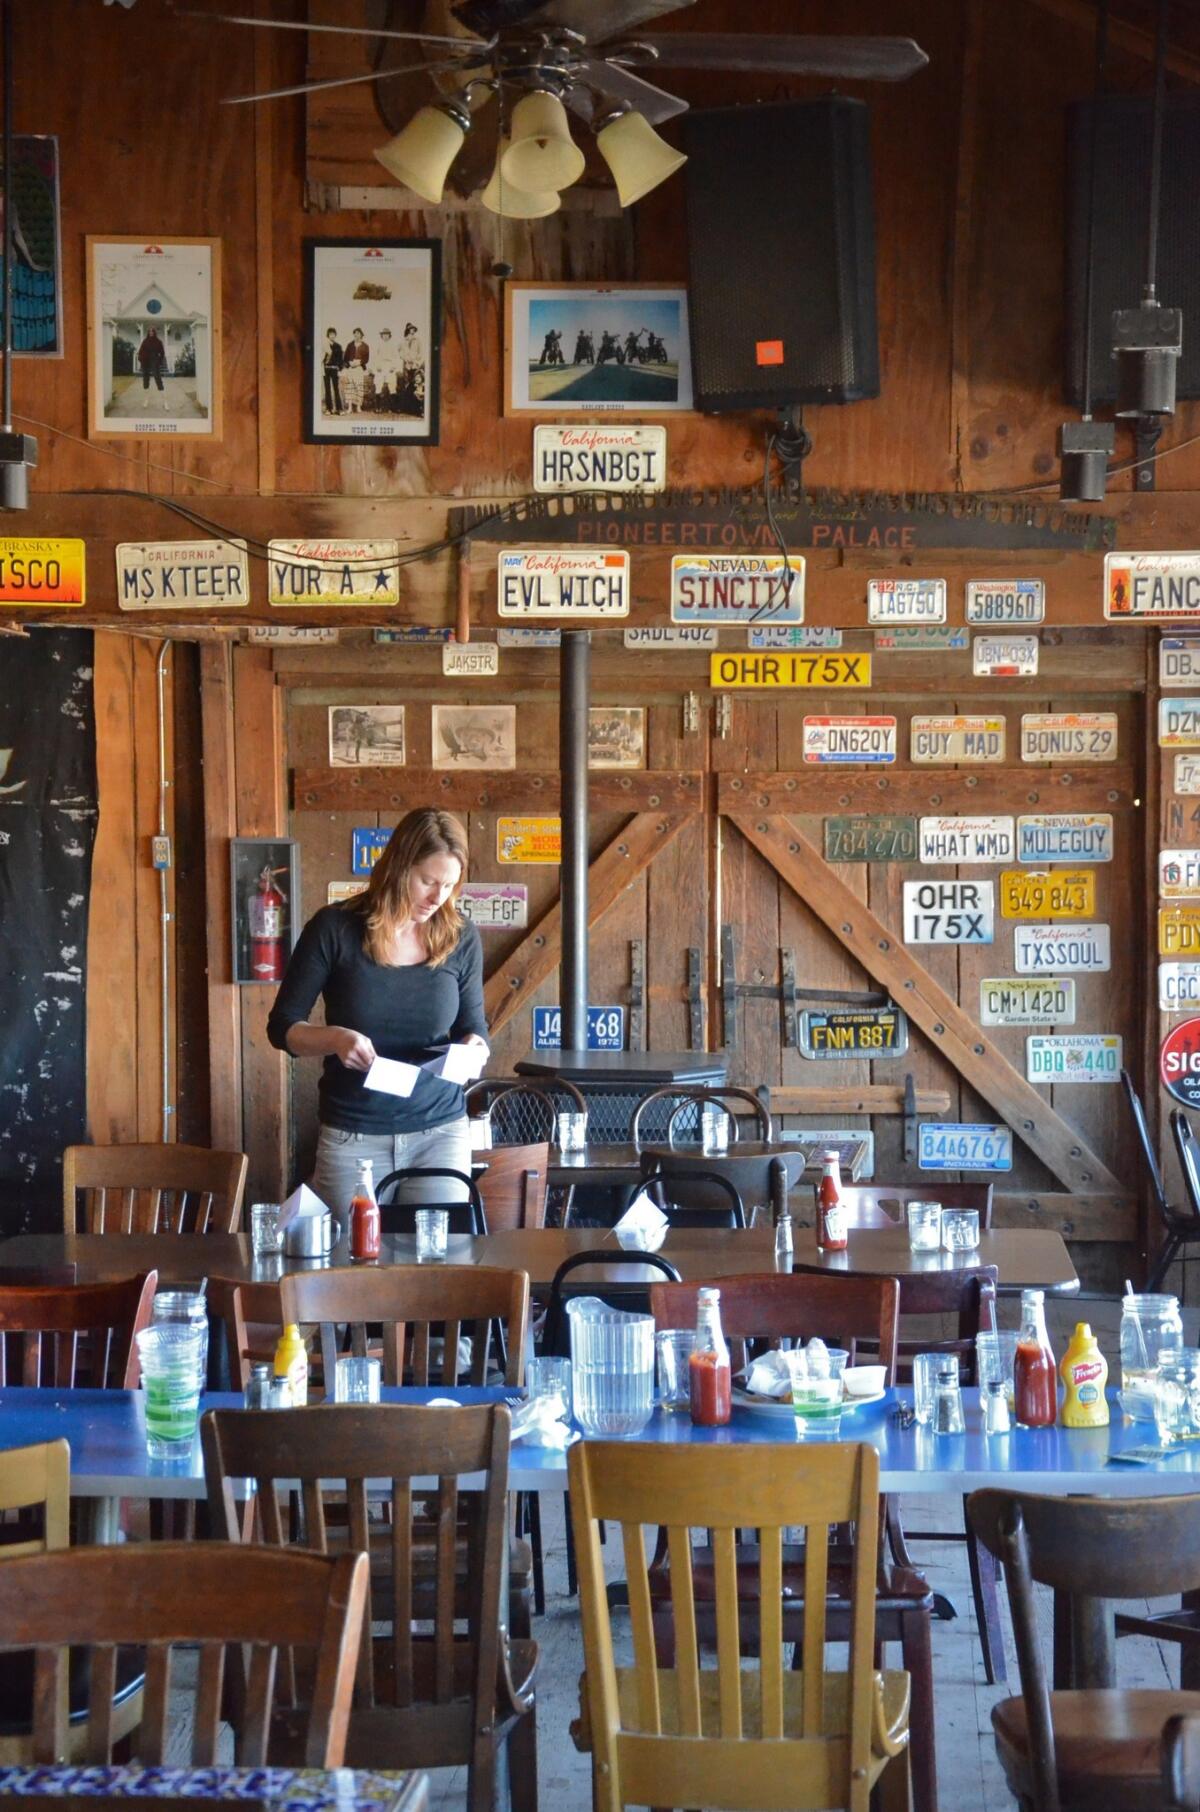 Pappy and Harriet's Pioneertown Palace is about 45 minutes north of Joshua Tree.